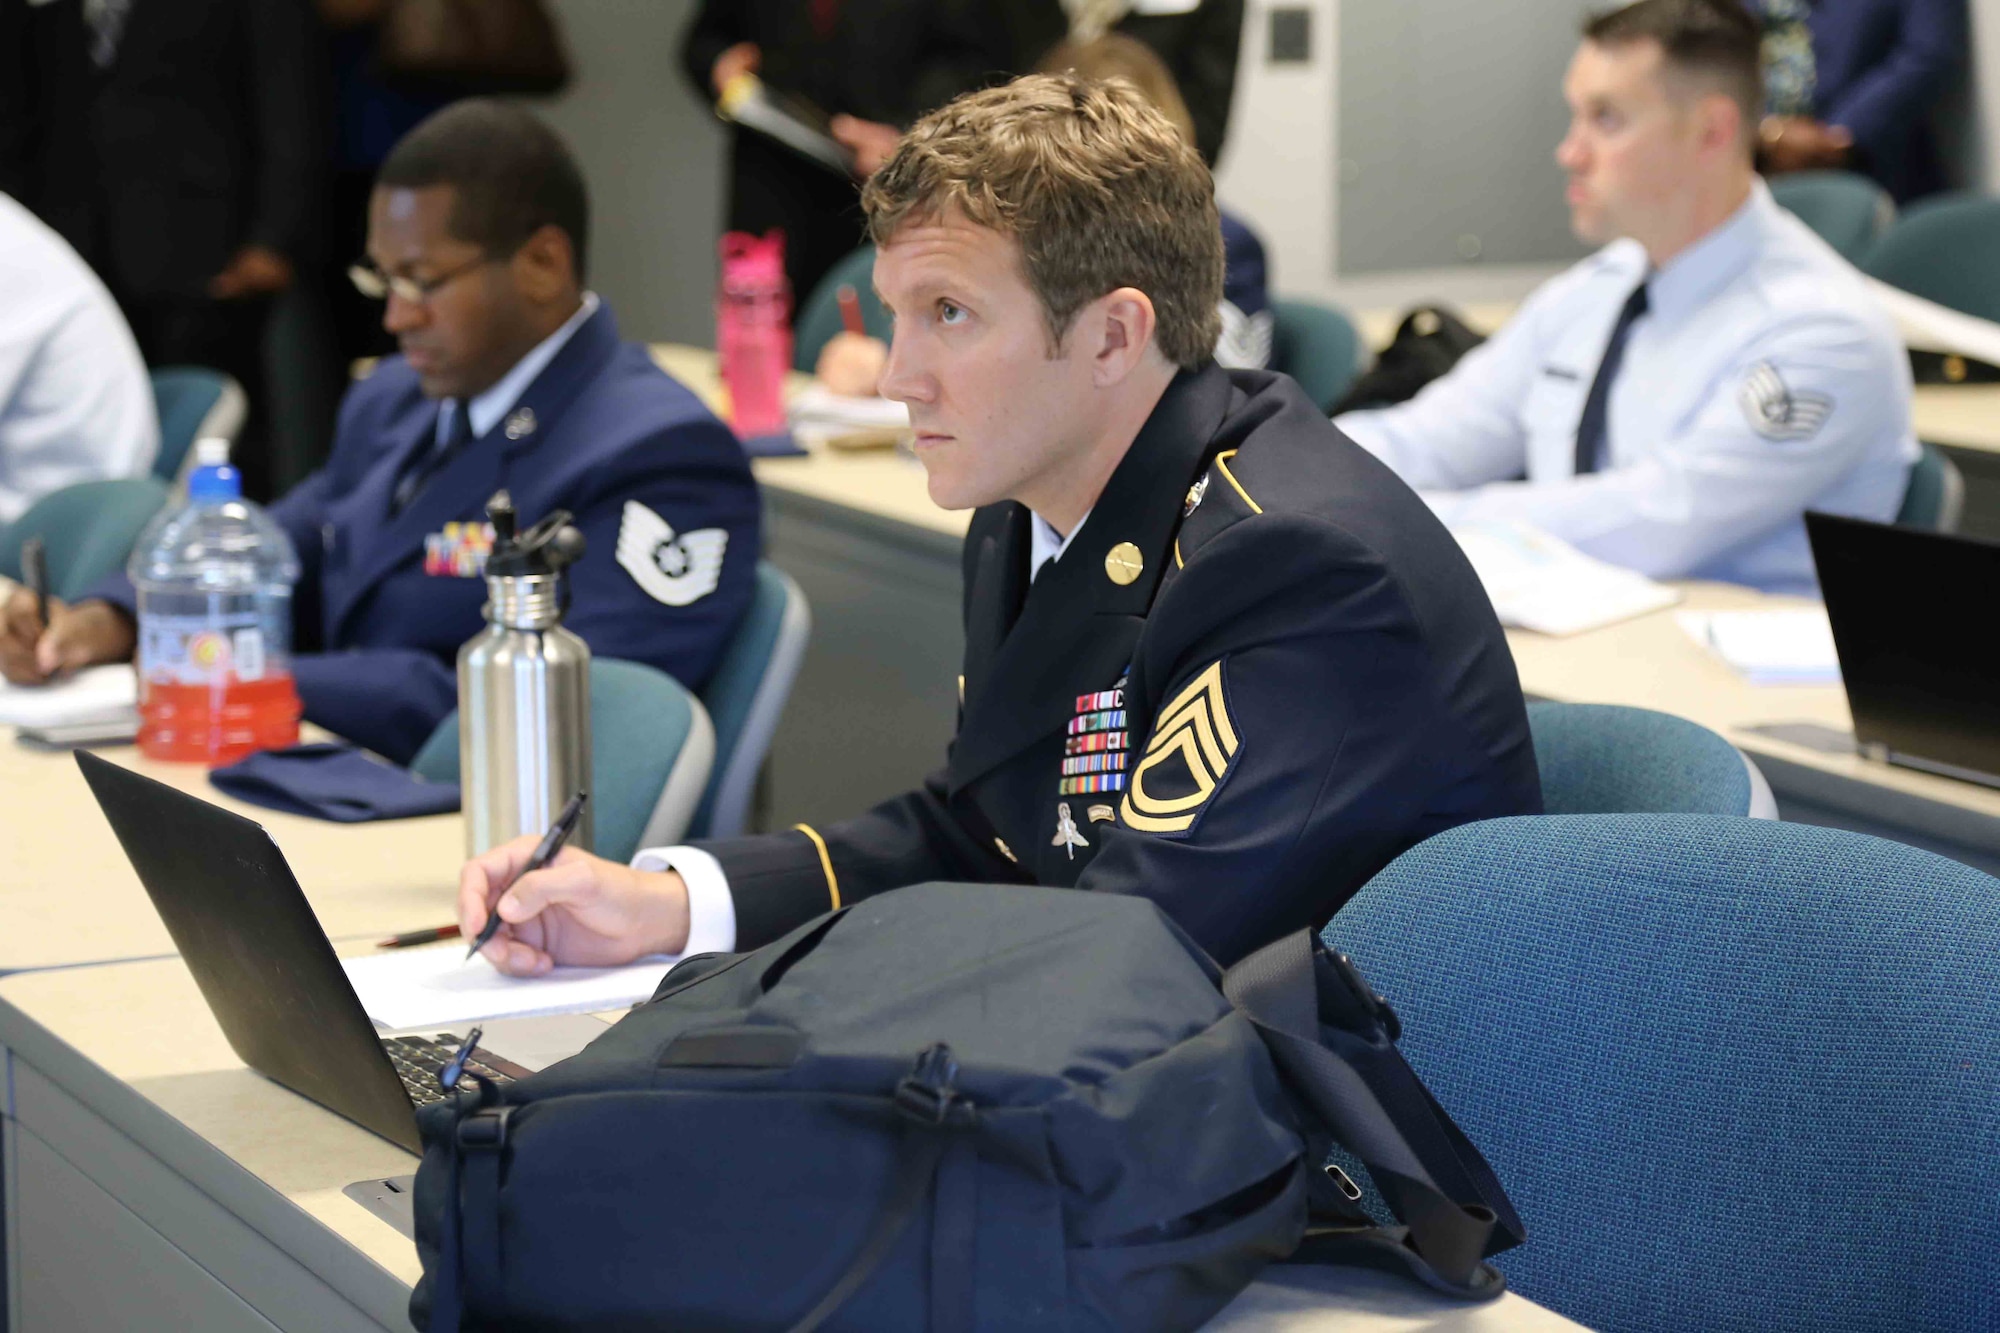 Army Sgt. 1st Class Joshua Richter listens to a lecture at George Mason University-Prince William Campus, Manassas, Va., as a student in the Uniformed Services University of the Health Sciences’ Enlisted to Medical Degree Preparatory Program in 2014. Richter, now an Army second lieutenant in his second year of medical studies at USU, was among the first 10 enlisted members accepted into EMDP2 program.